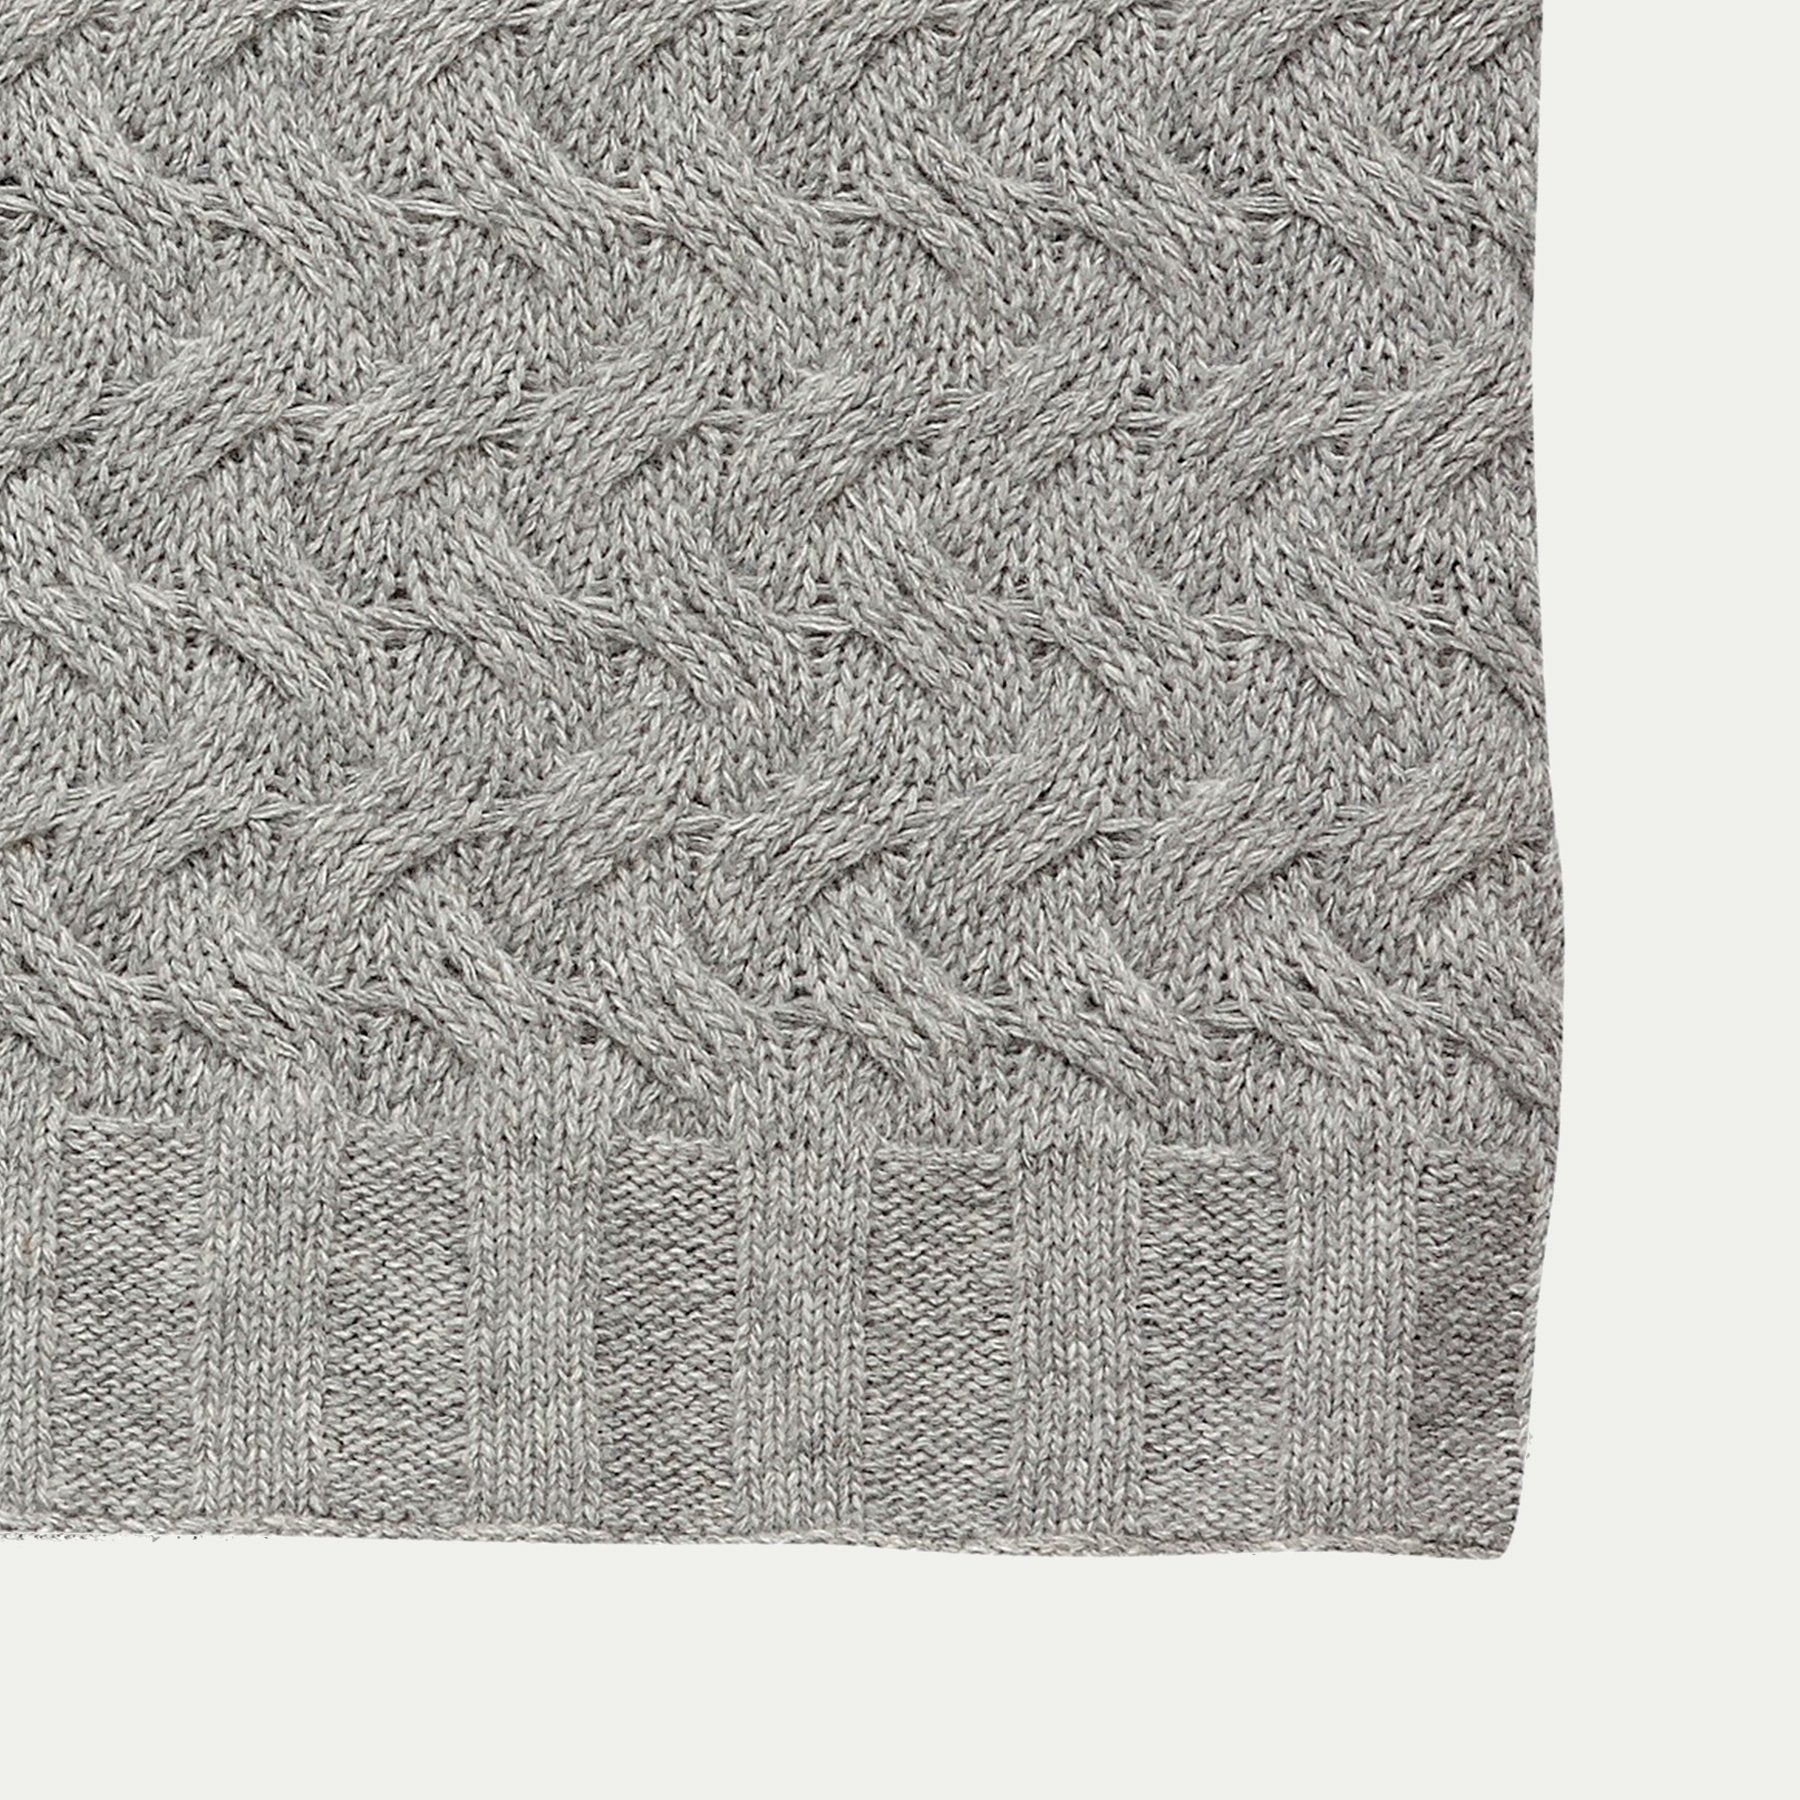 Close up of a Hubsch Interior Scandi designer large wool cable knit throw blanket in pale grey on white background